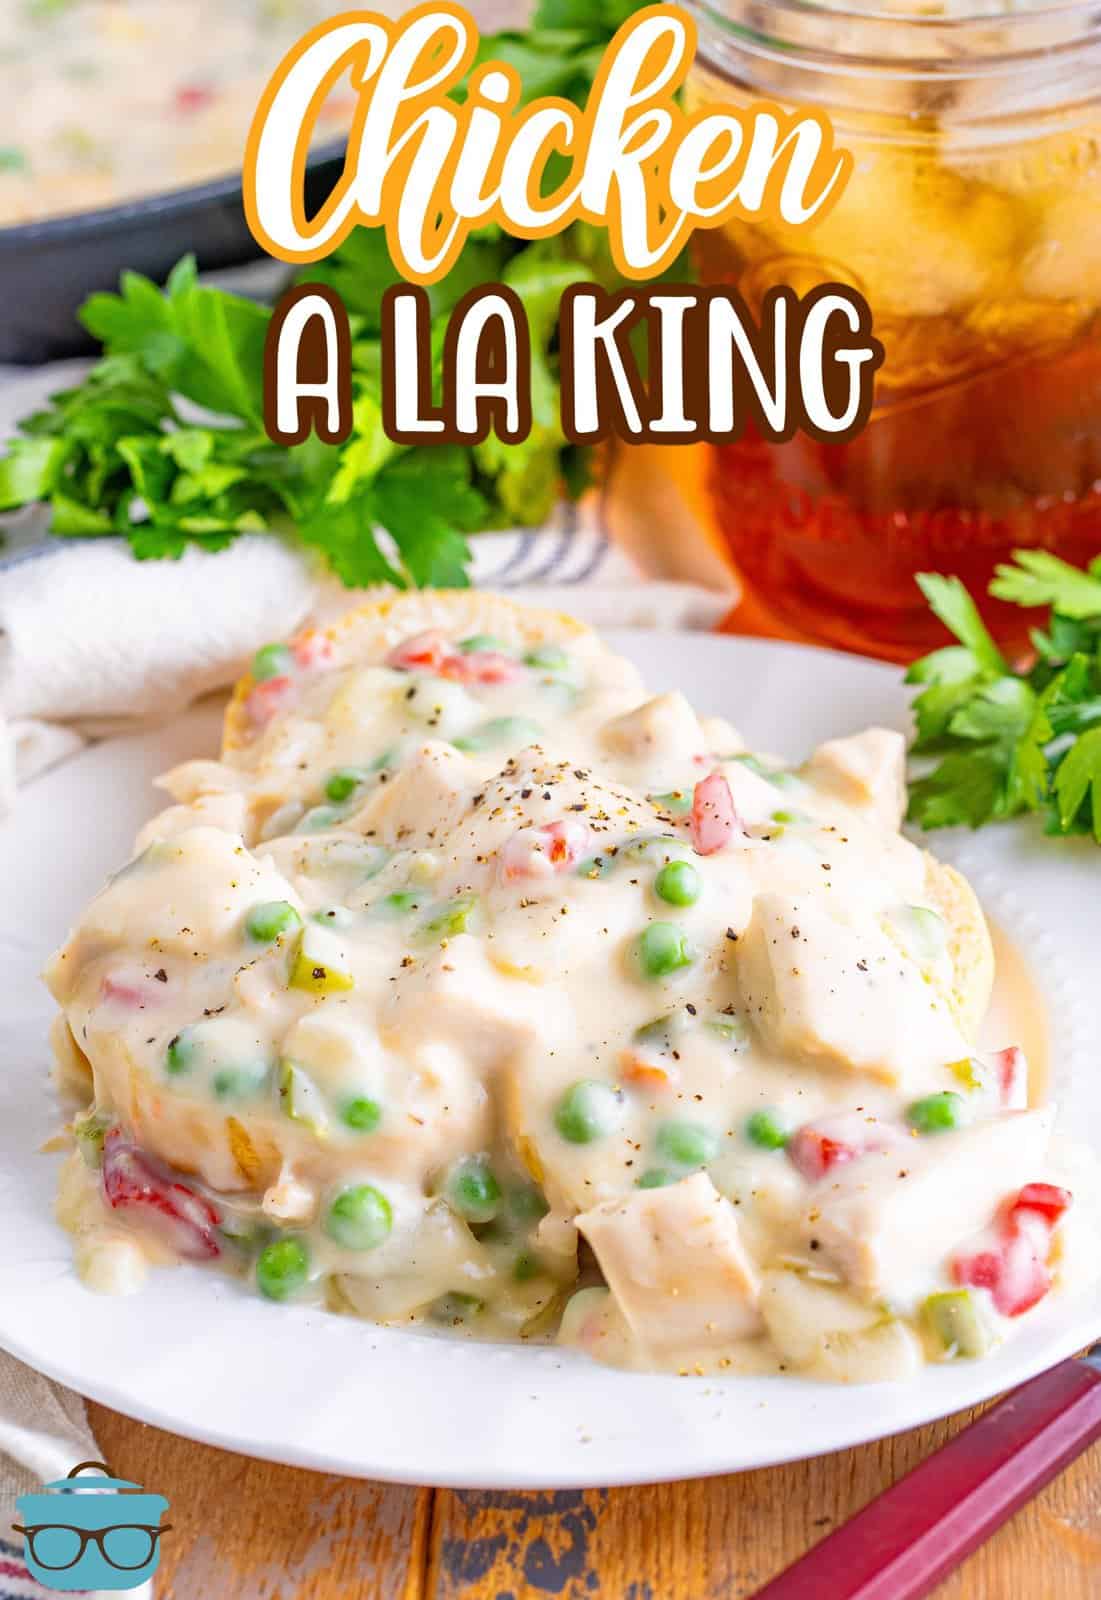 A white plate with a large serving of Chicken a la King.